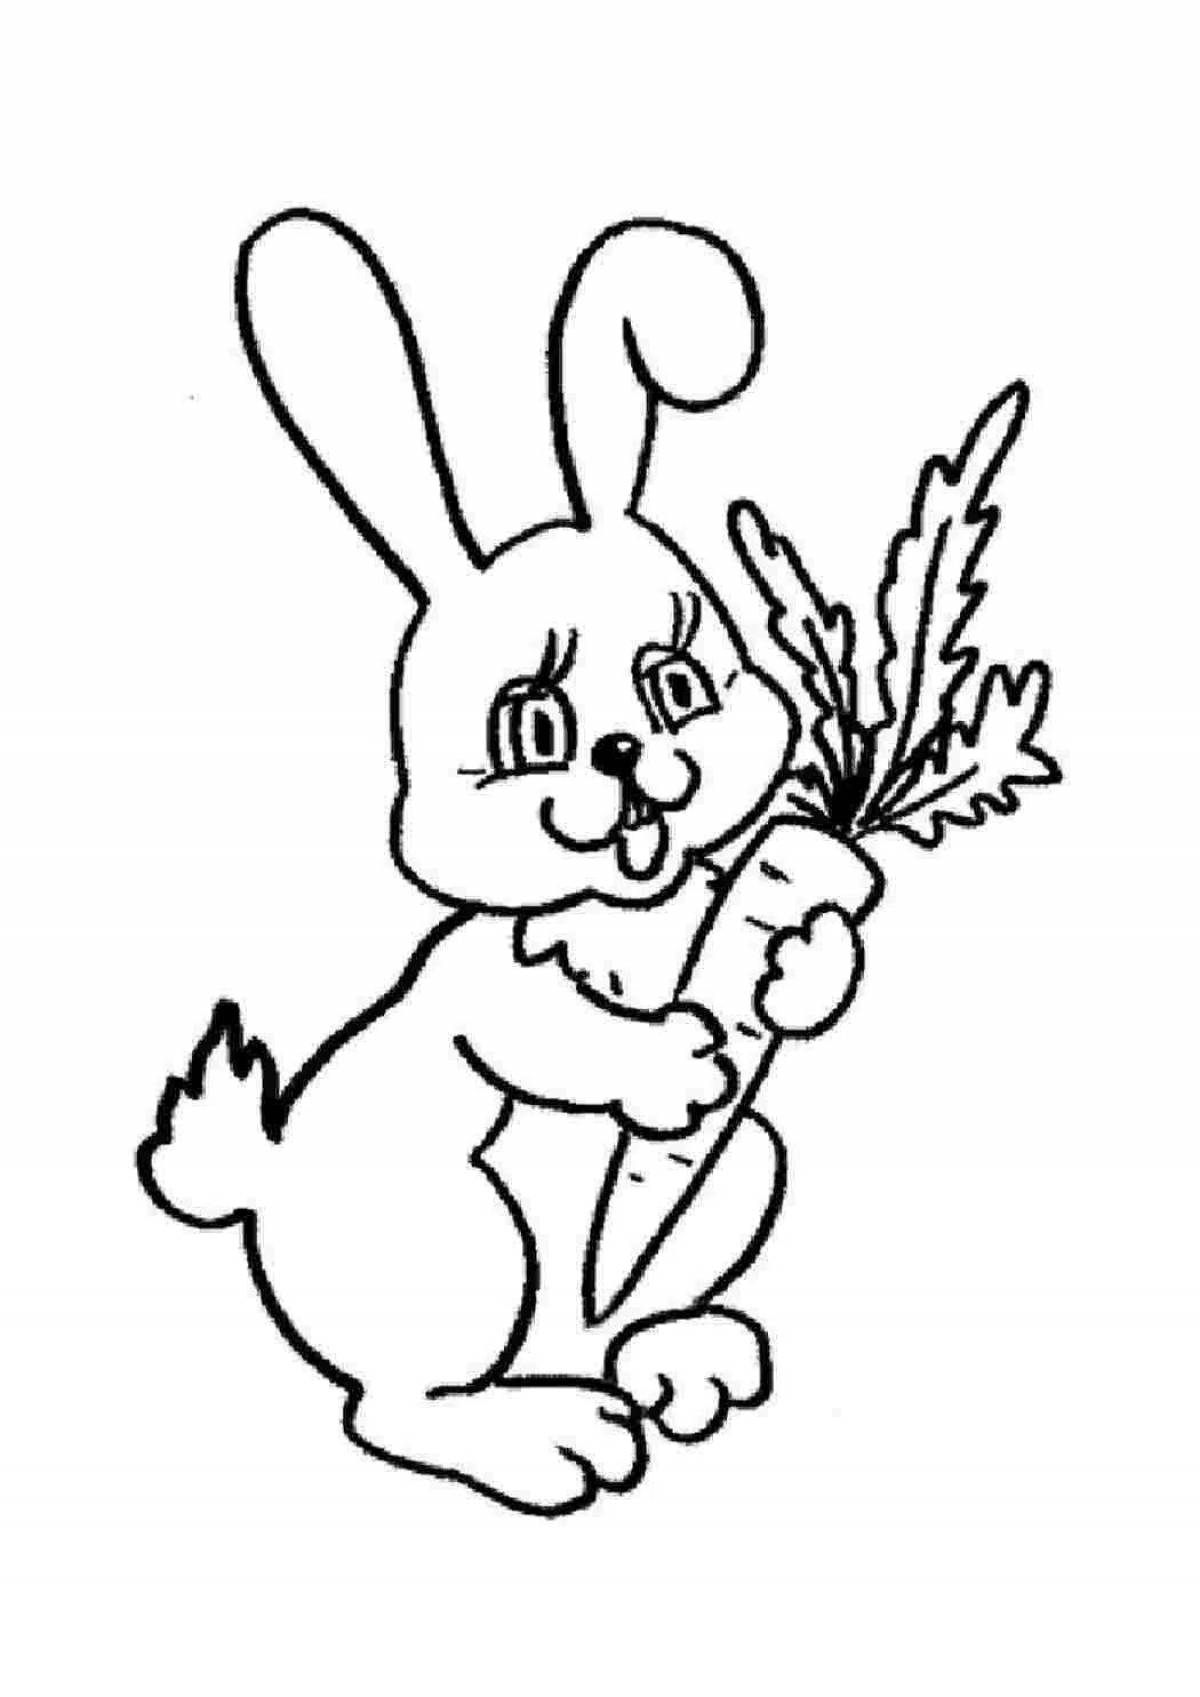 Sparkling rabbit coloring with carrot for kids